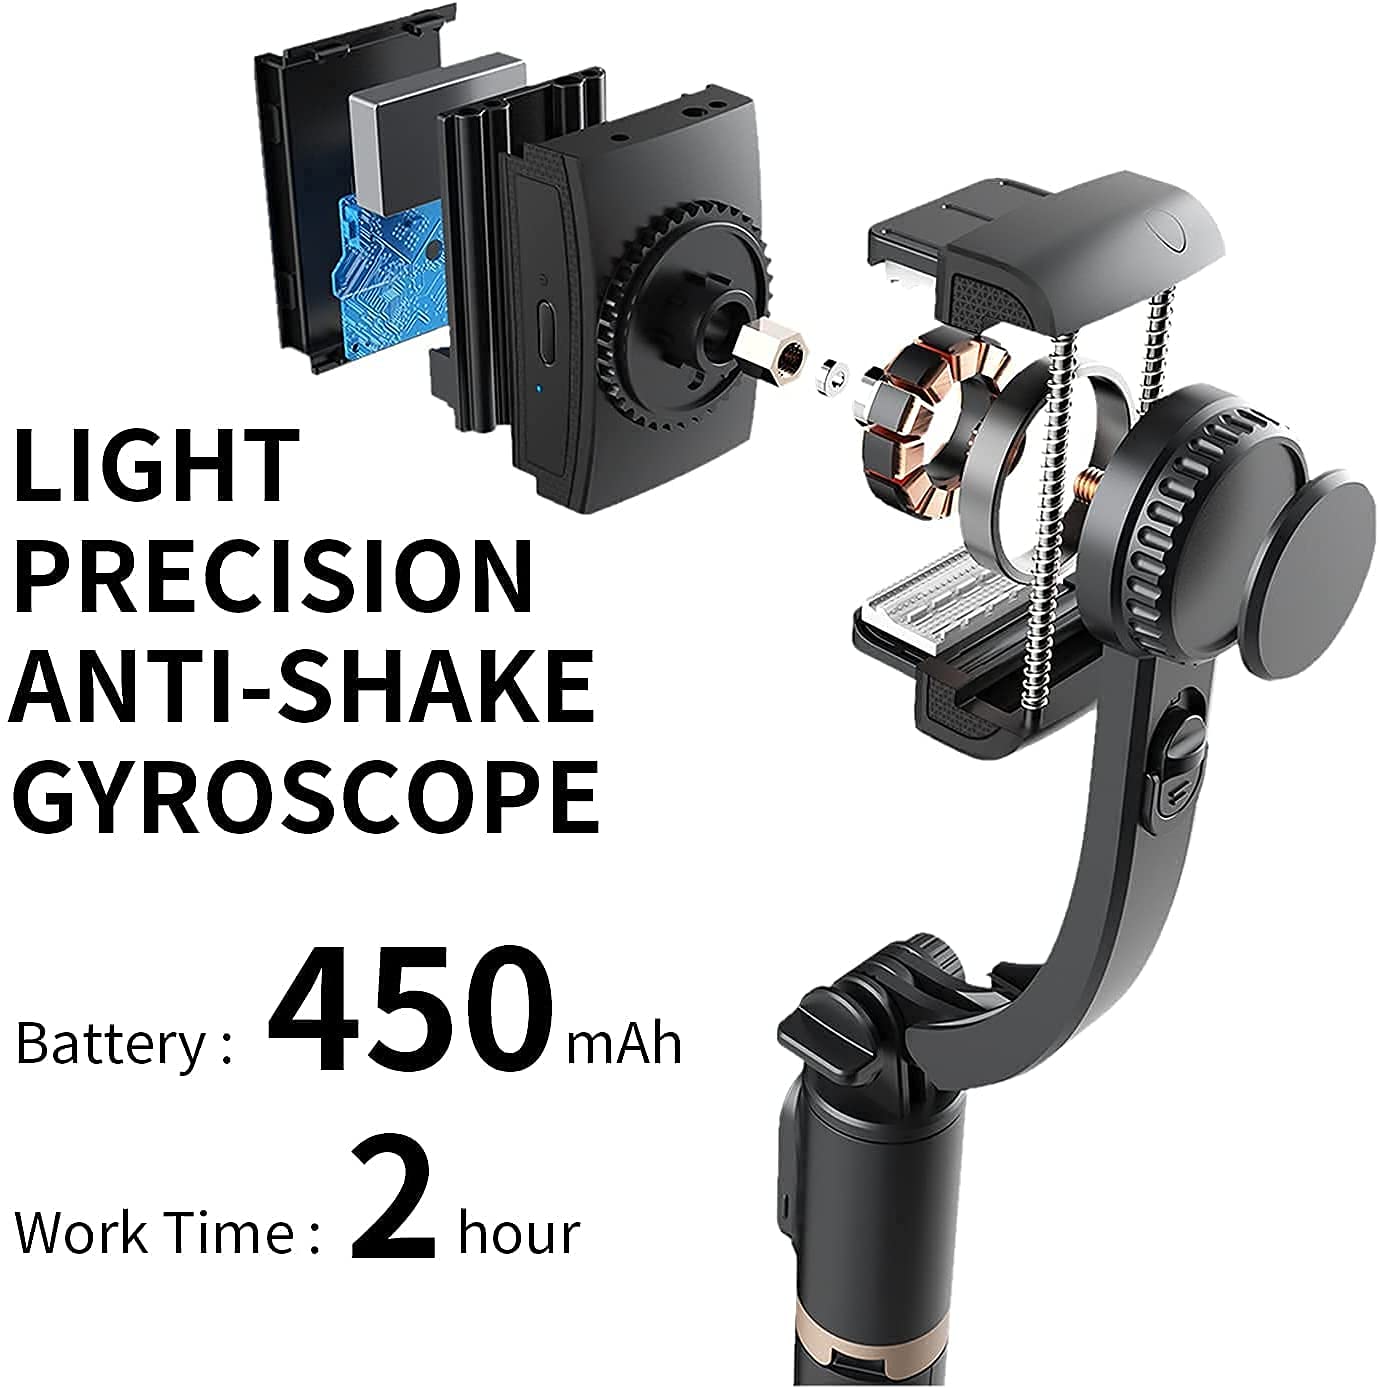 9JOY Q08 Gimbal Stabilizer for Smartphone with Extendable Bluetooth Selfie Stick and Tripod, Multifunction Remote 360 Automatic Rotation, for iPhone/Android